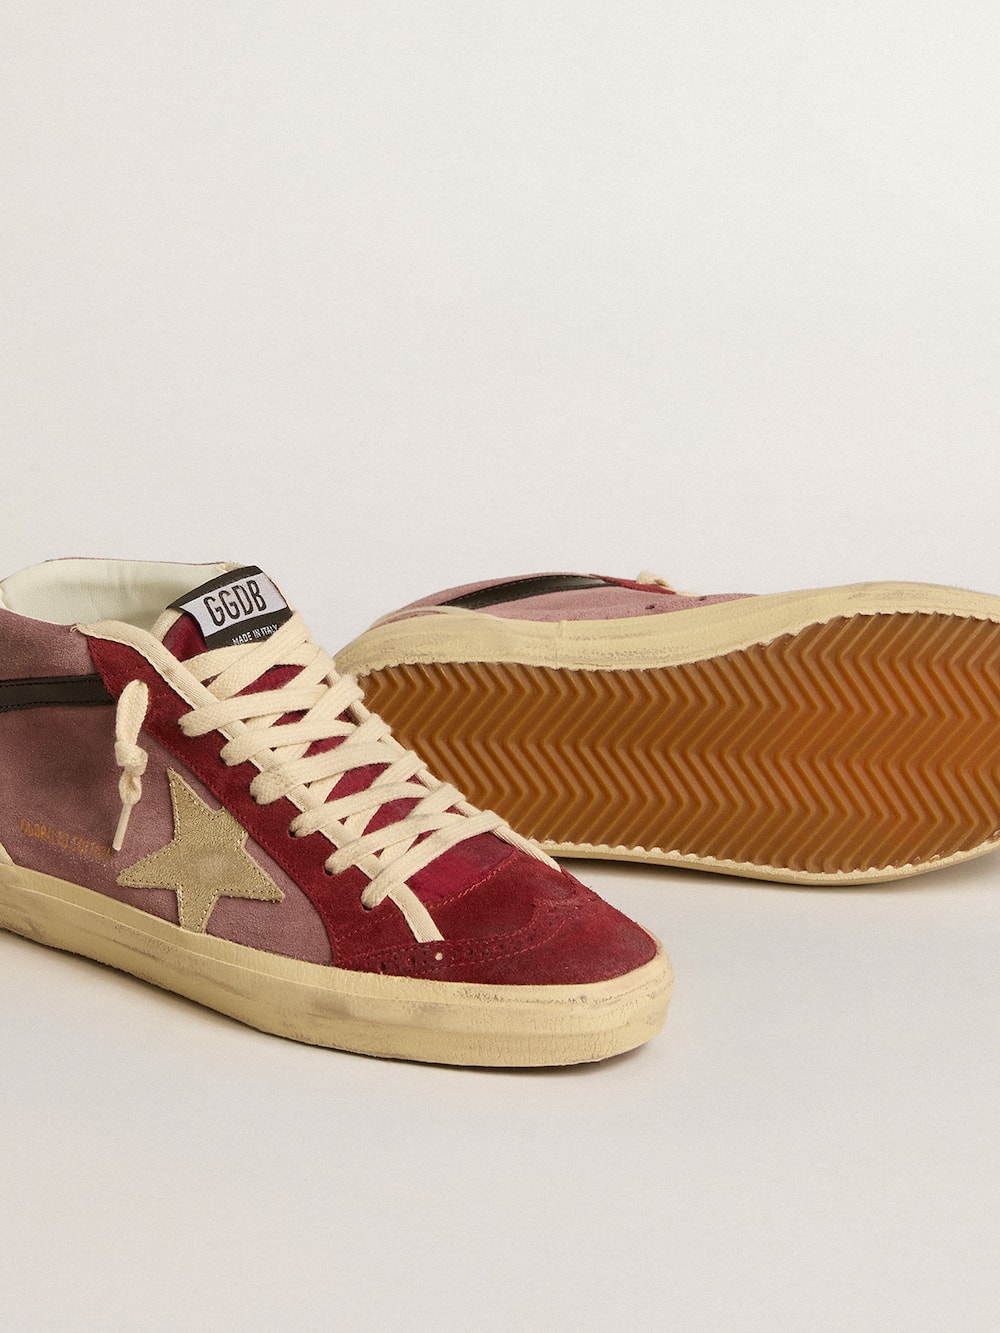 Golden Goose - Mid Star LTD in violet suede with platinum leather star and black flash in 